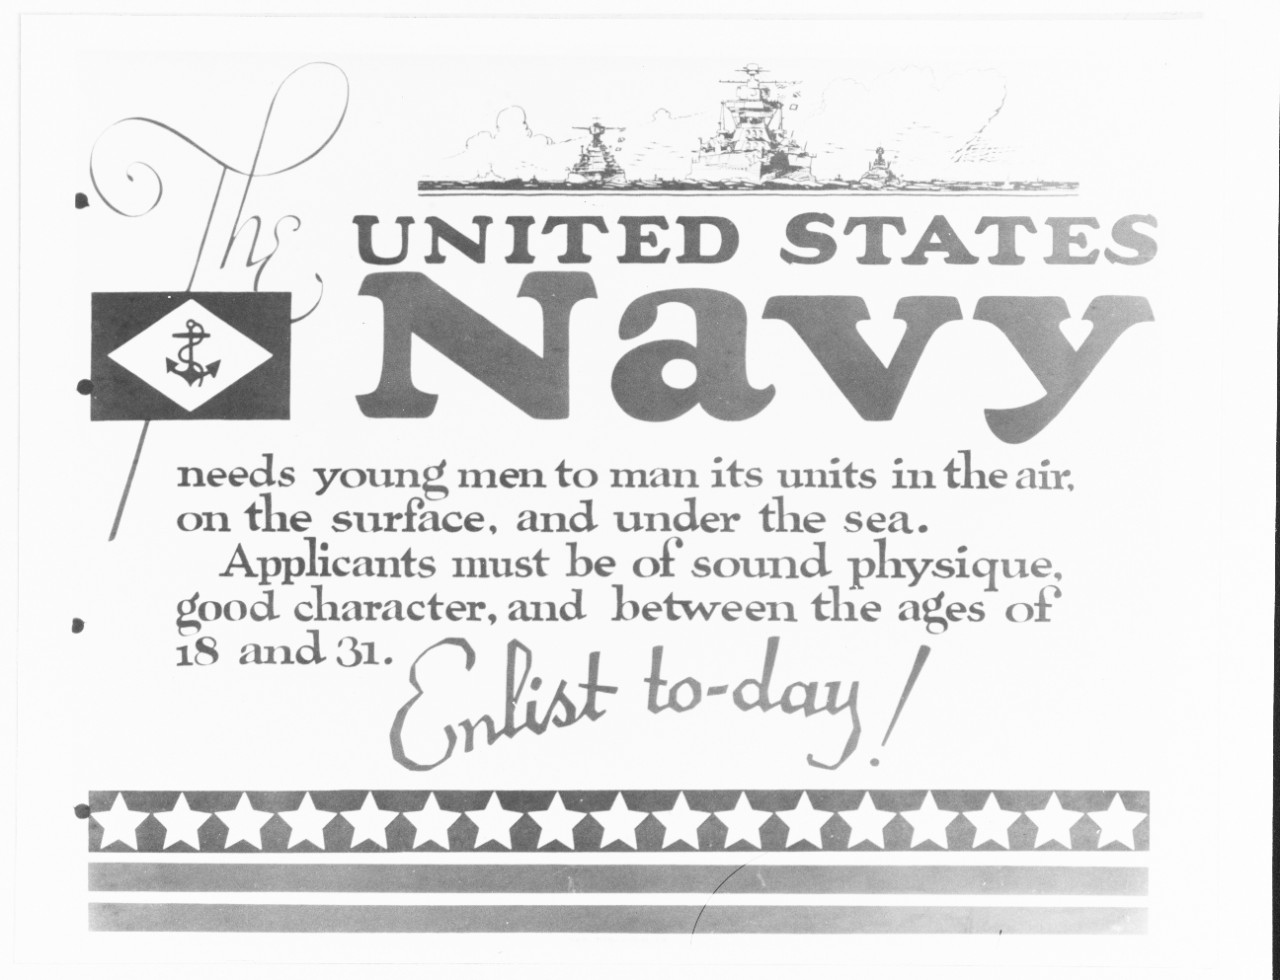 Navy poster, "The United States Navy"